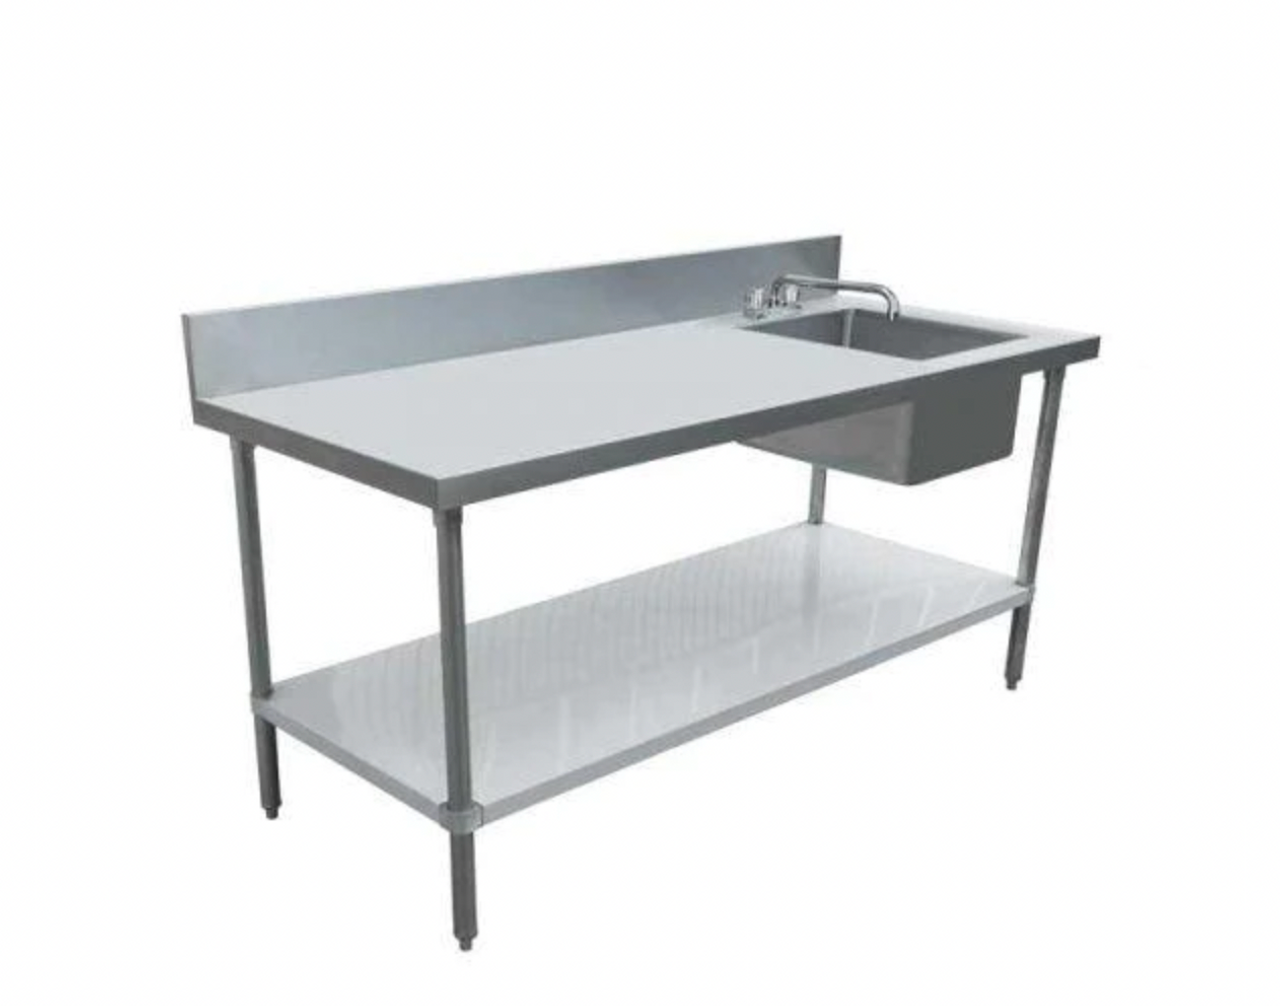 30" x 60" Galvanized Stainless Steel Table with Right Sink and 6" Backsplash